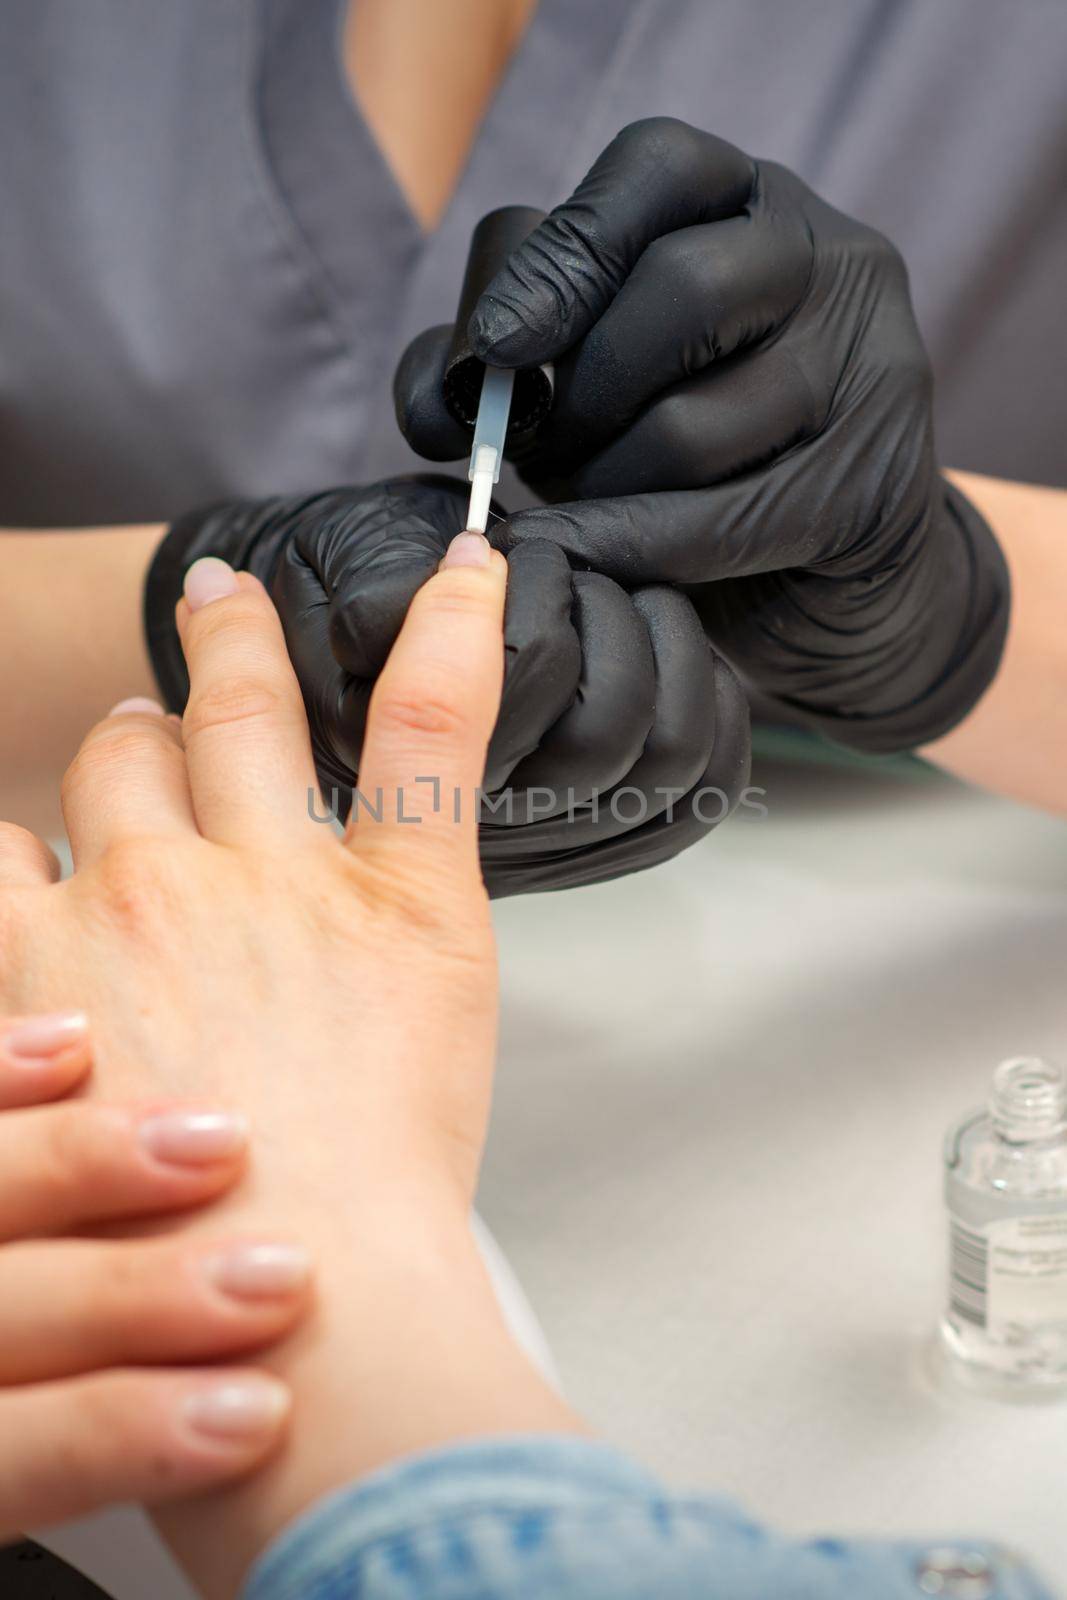 Painting female nails. Hands of manicurist in black gloves is applying transparent nail polish on female nails in a manicure salon